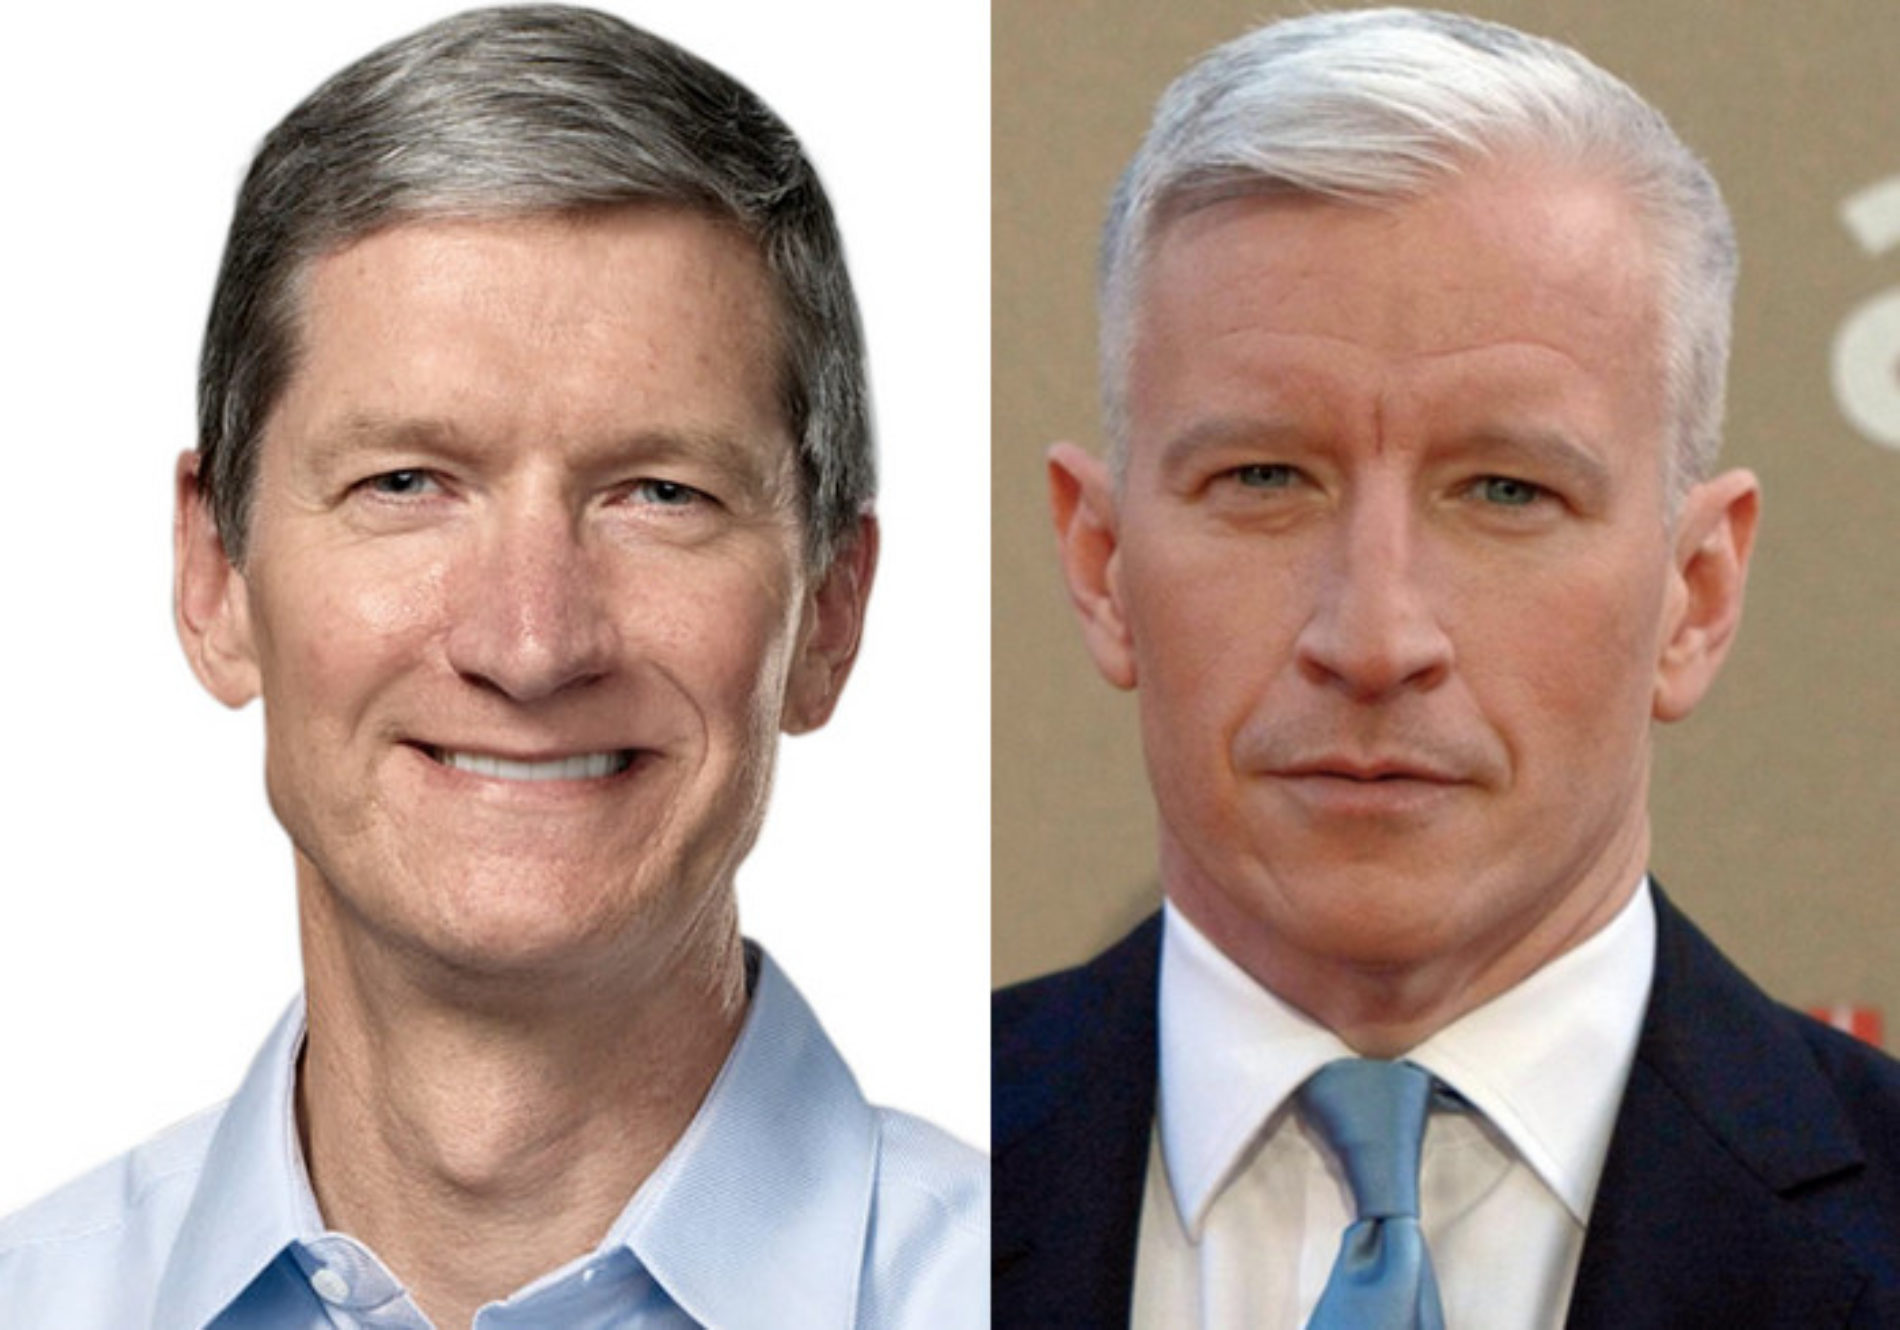 Tim Cook consulted with Anderson Cooper ‘multiple times’ before coming out